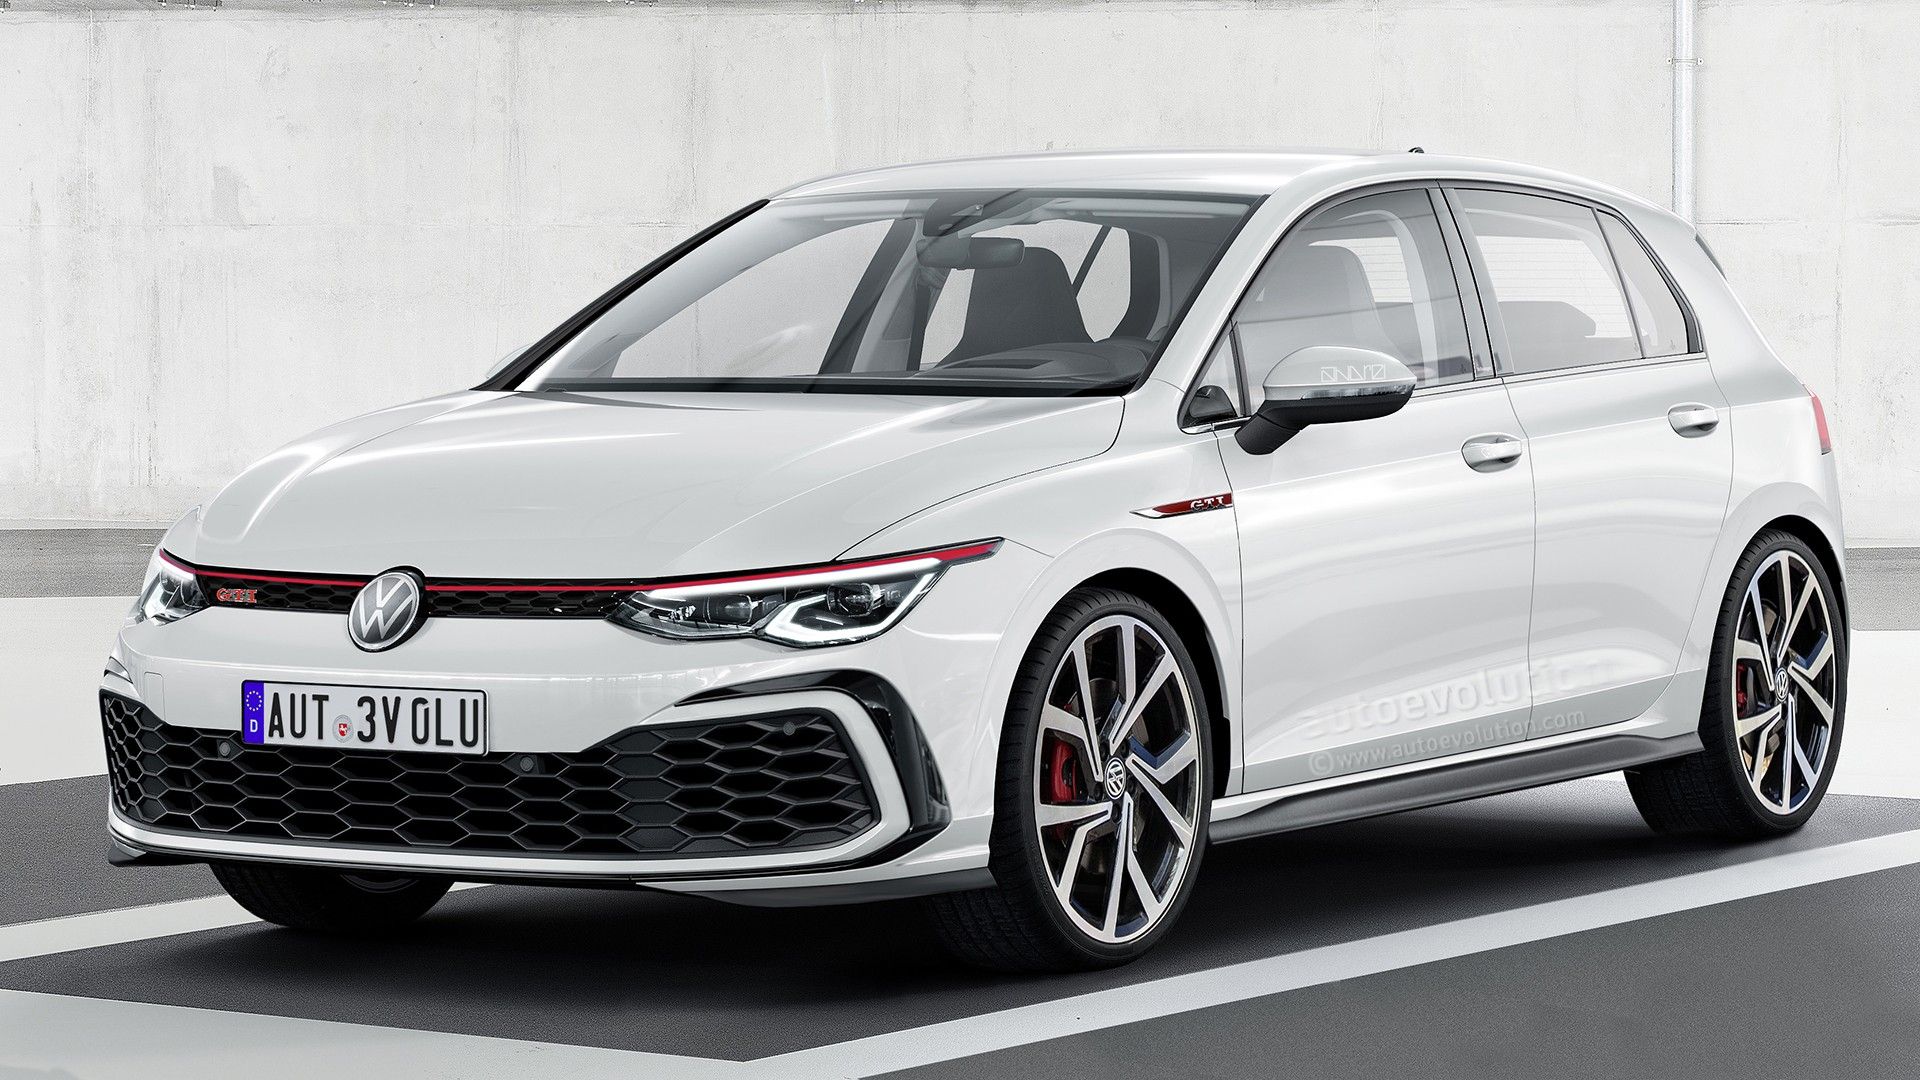 The 2021 Volkswagen Golf GTI has varying trim levels